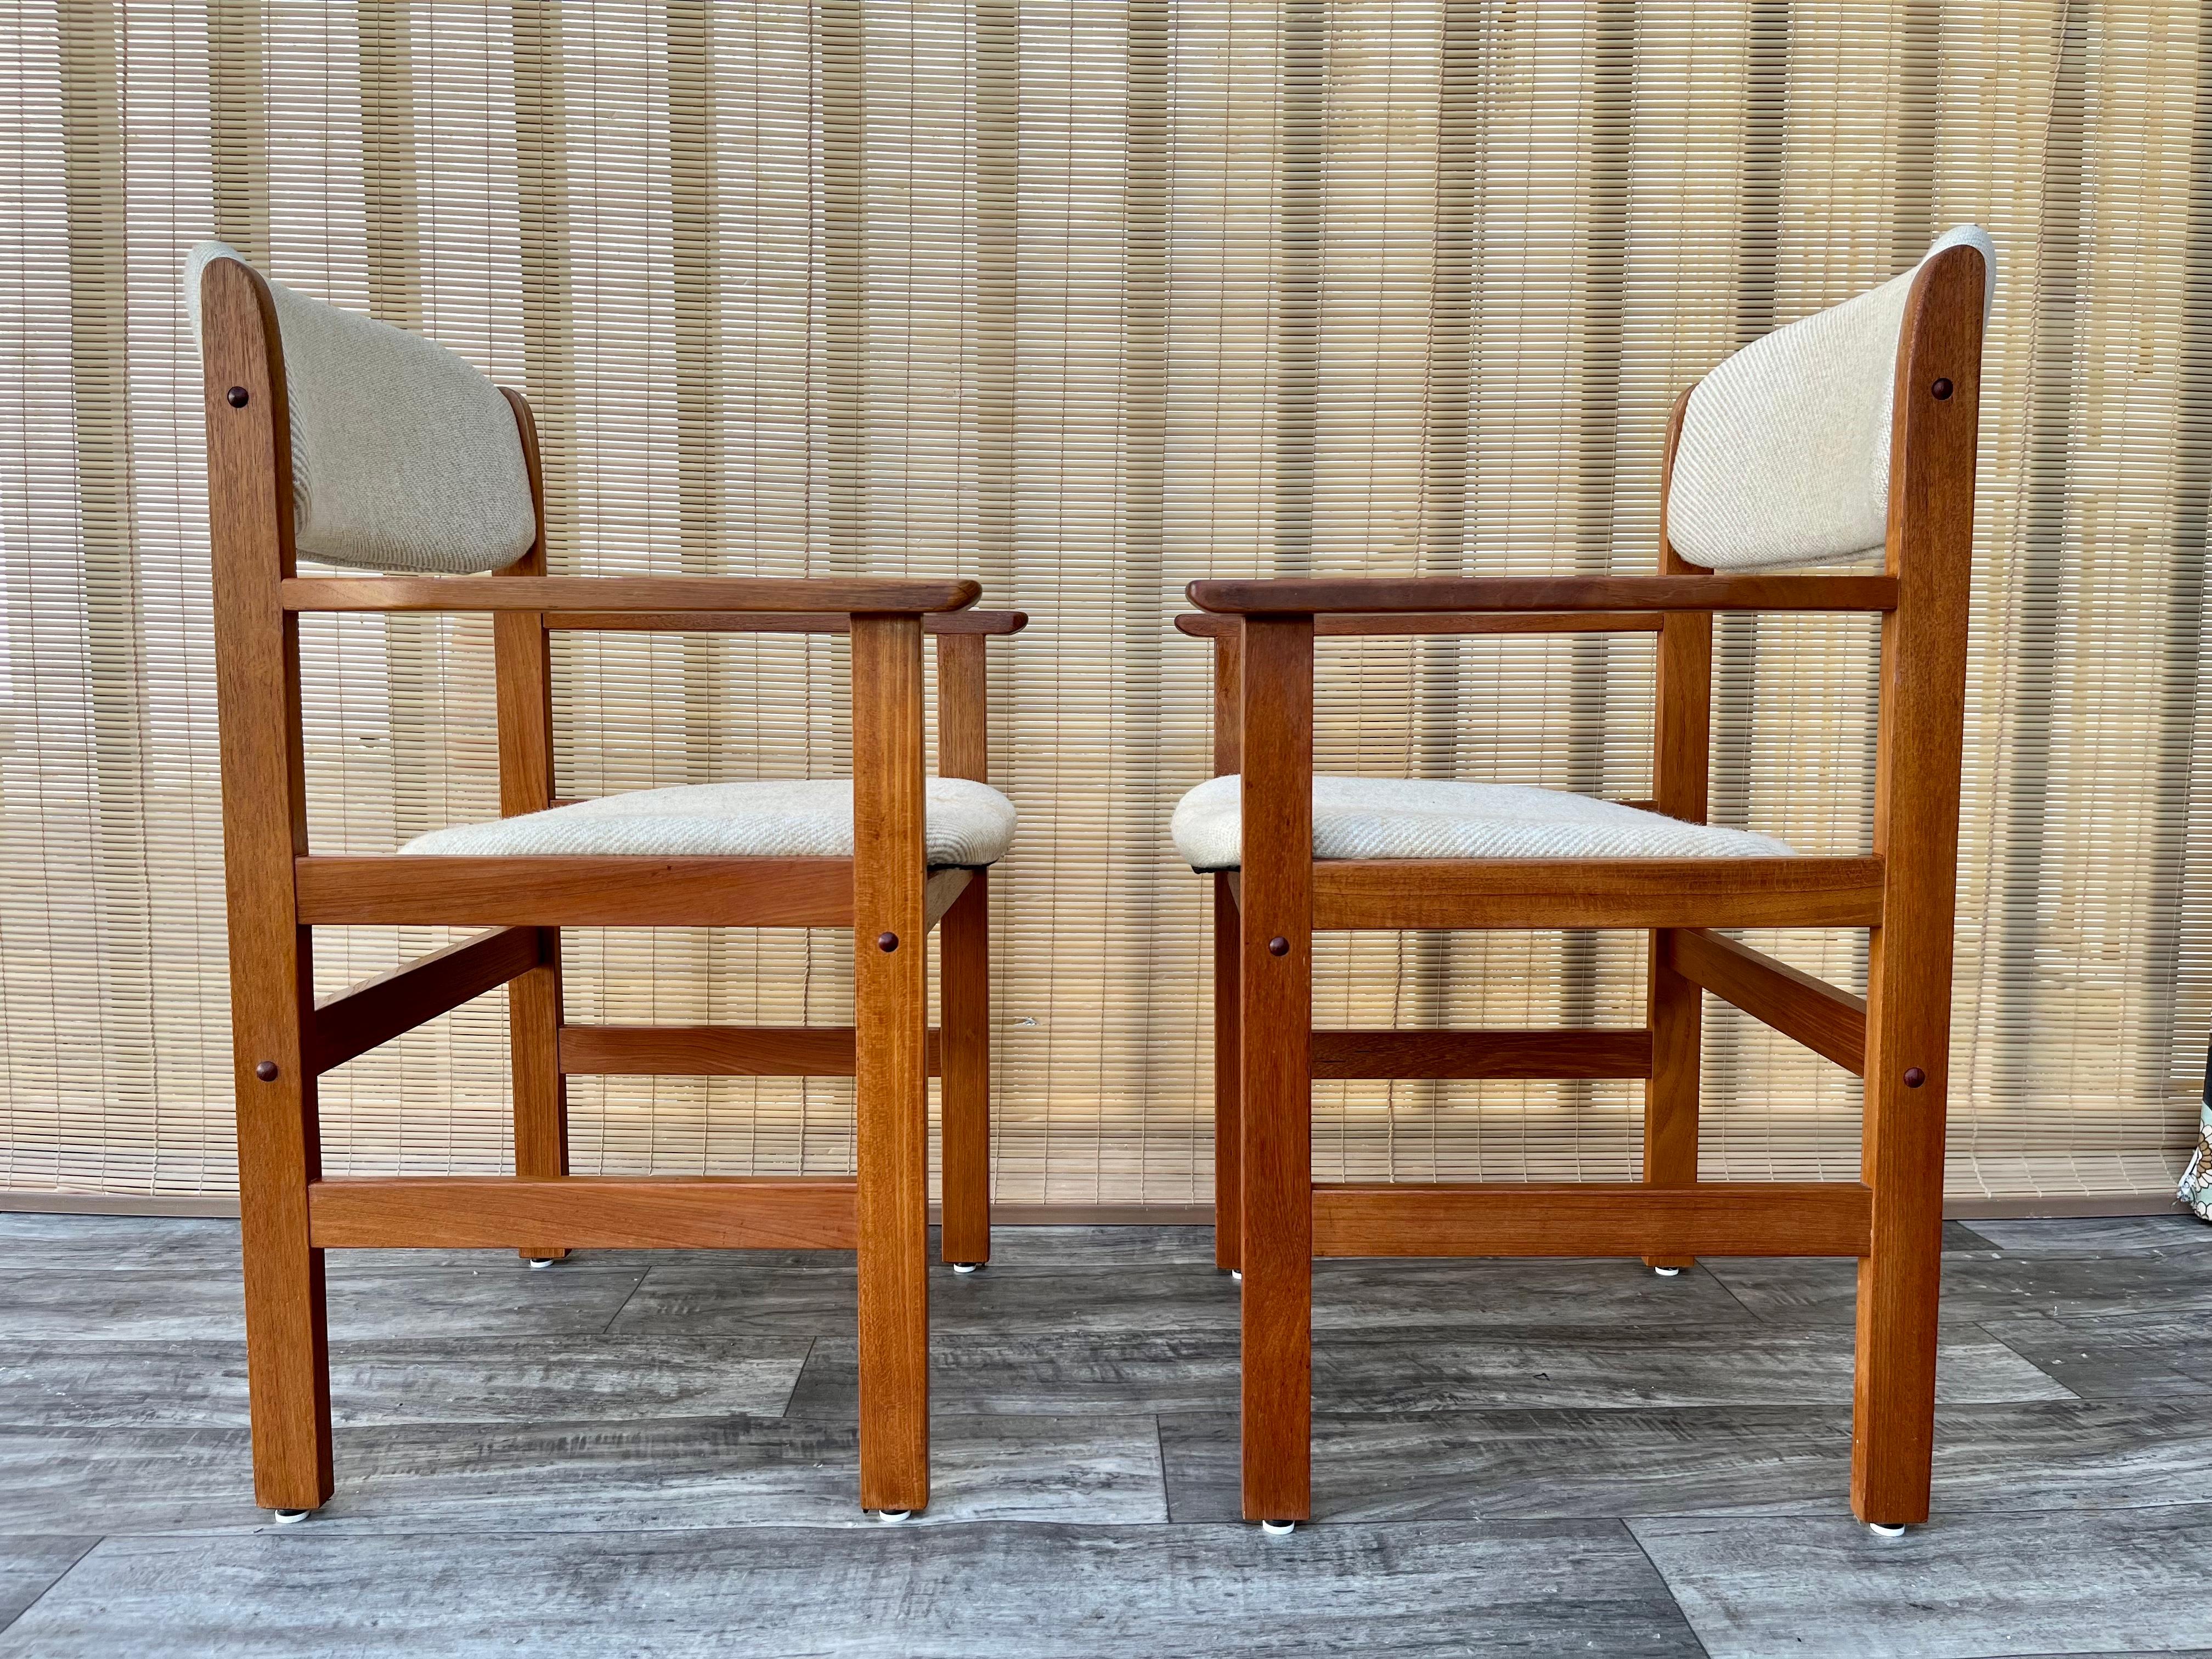 Upholstery 1980s Mid-Century Danish Modern Style Captain Chairs by Benny Linden Design. For Sale